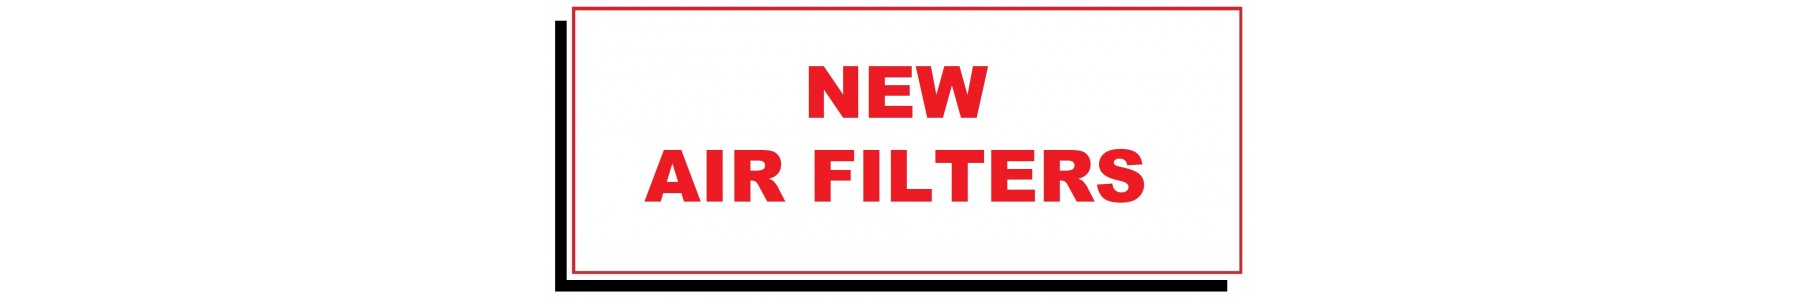 NEW AIR FILTERS